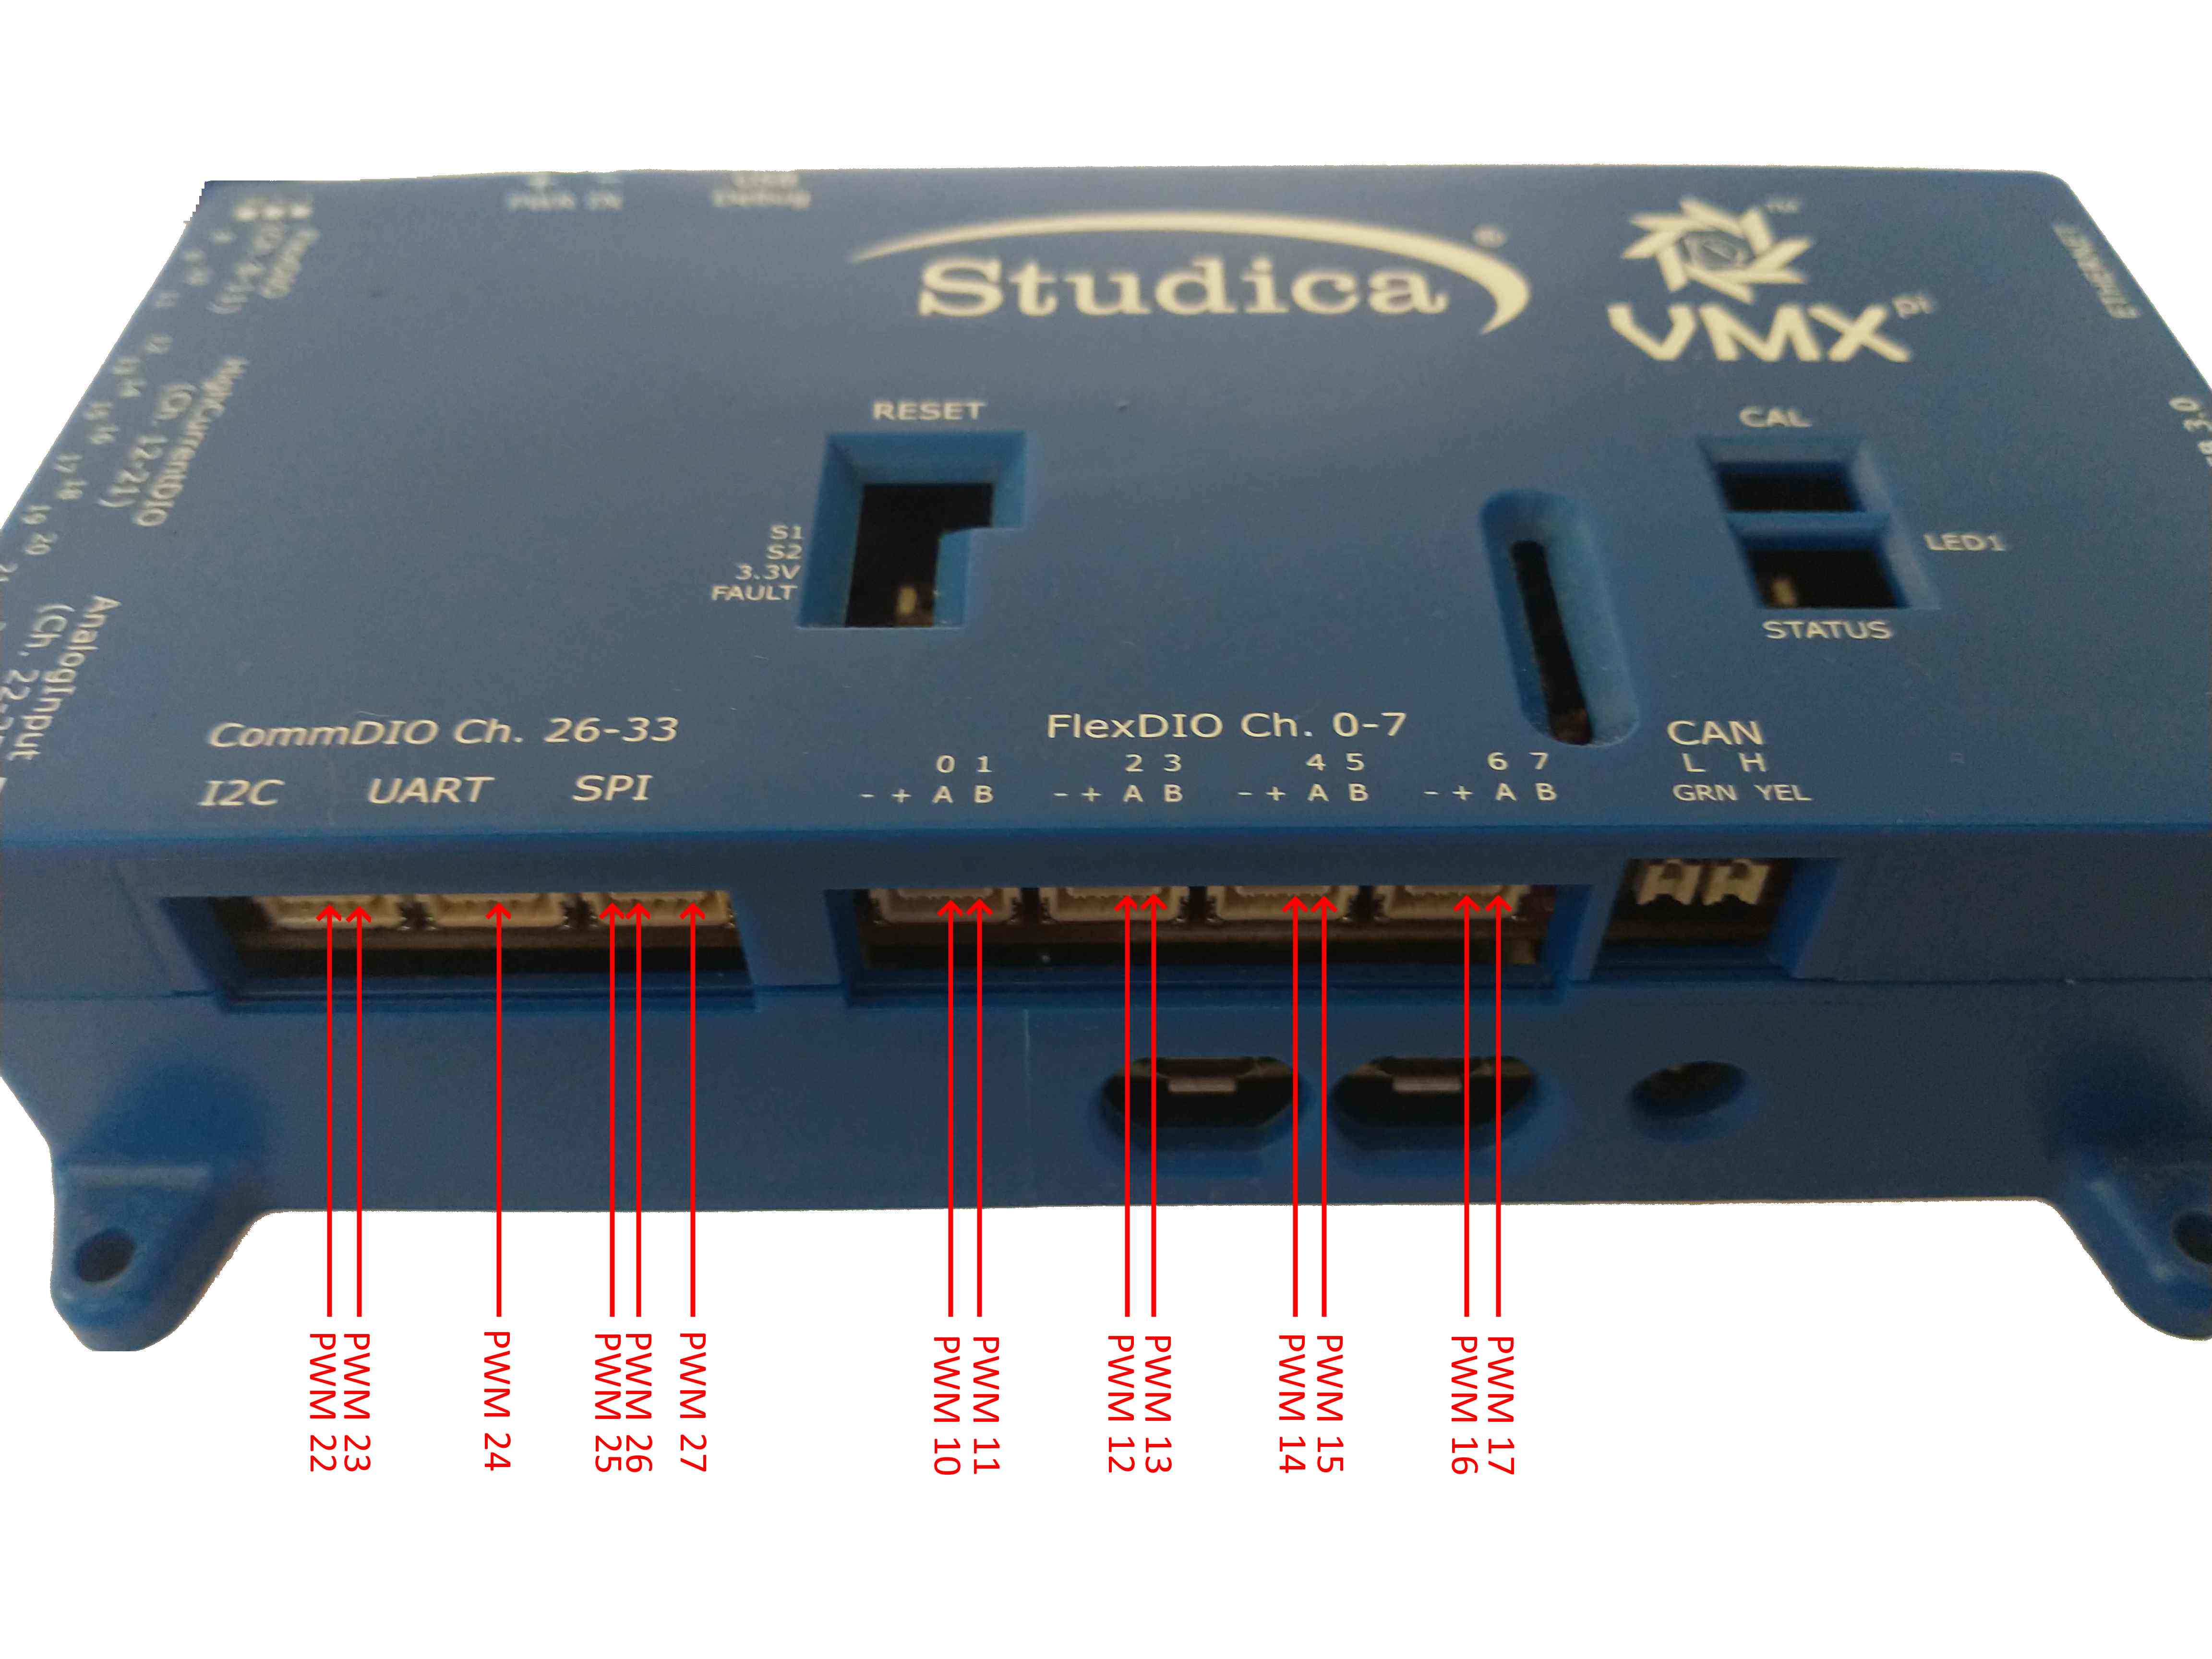 ../../_images/CommDIO_FlexDIO_And_CAN_Connectors_Trimmed_WPIAddressing_PWM.jpg